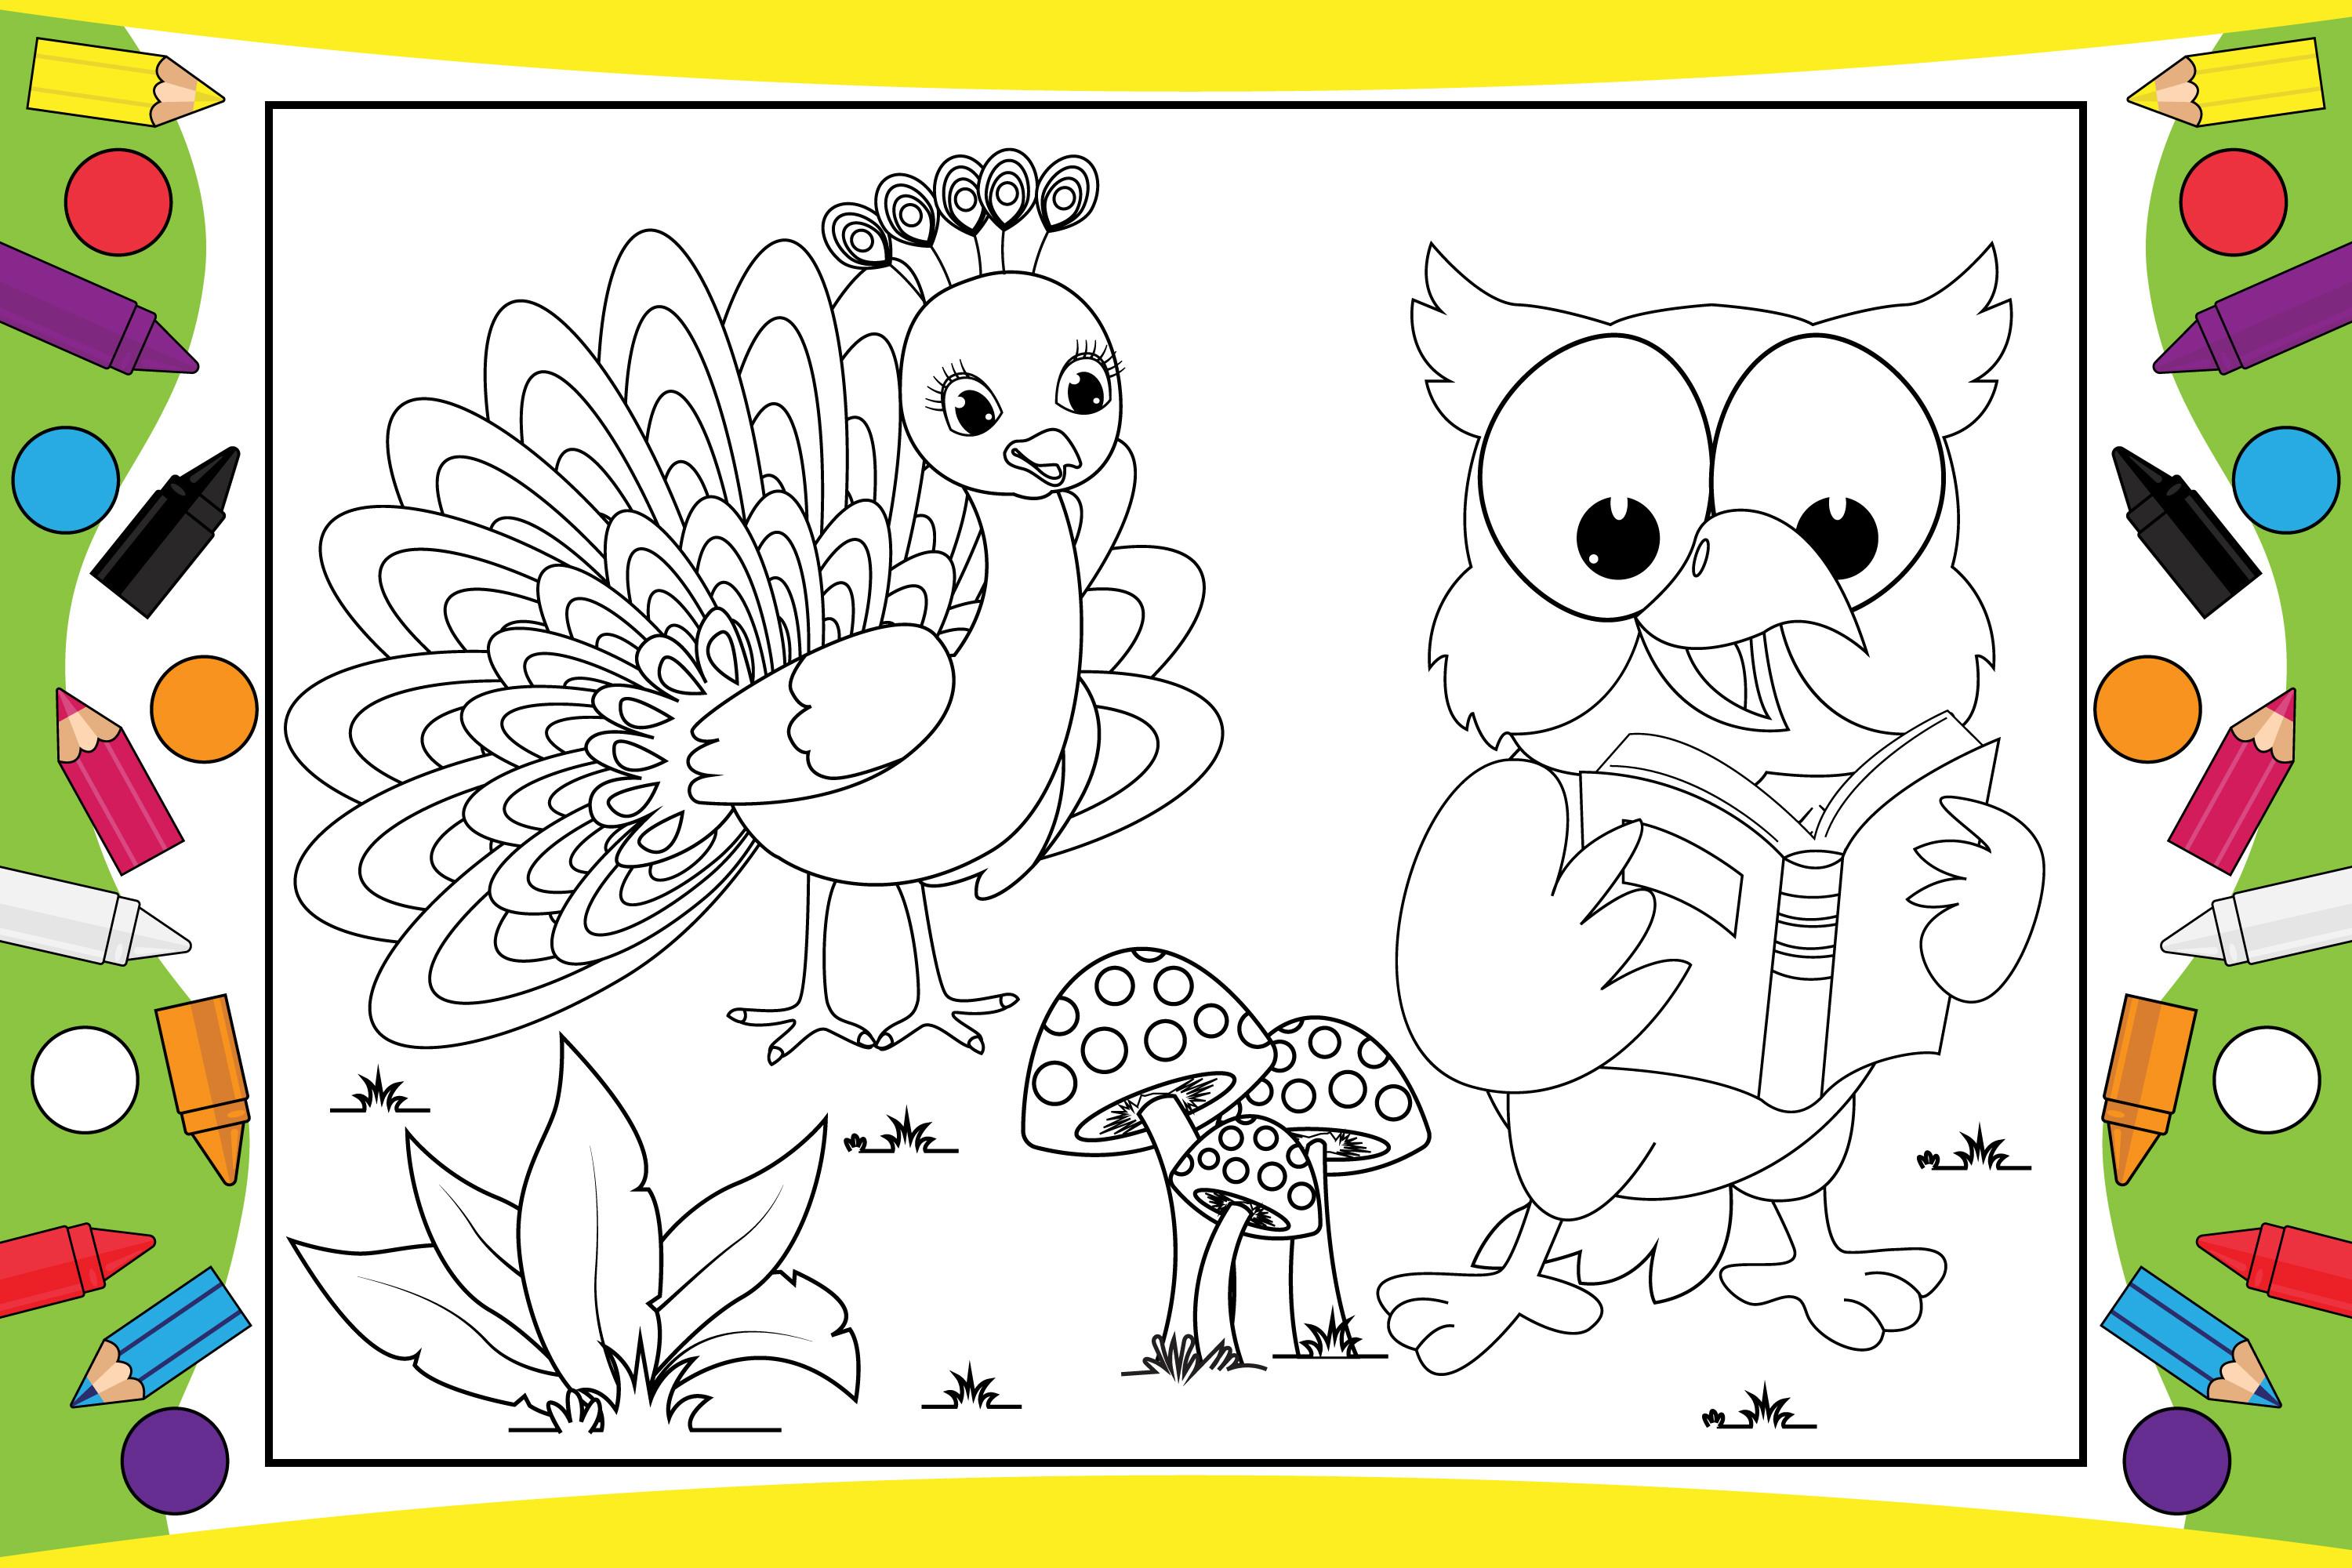 Coloring Peacock and Owl for Kids